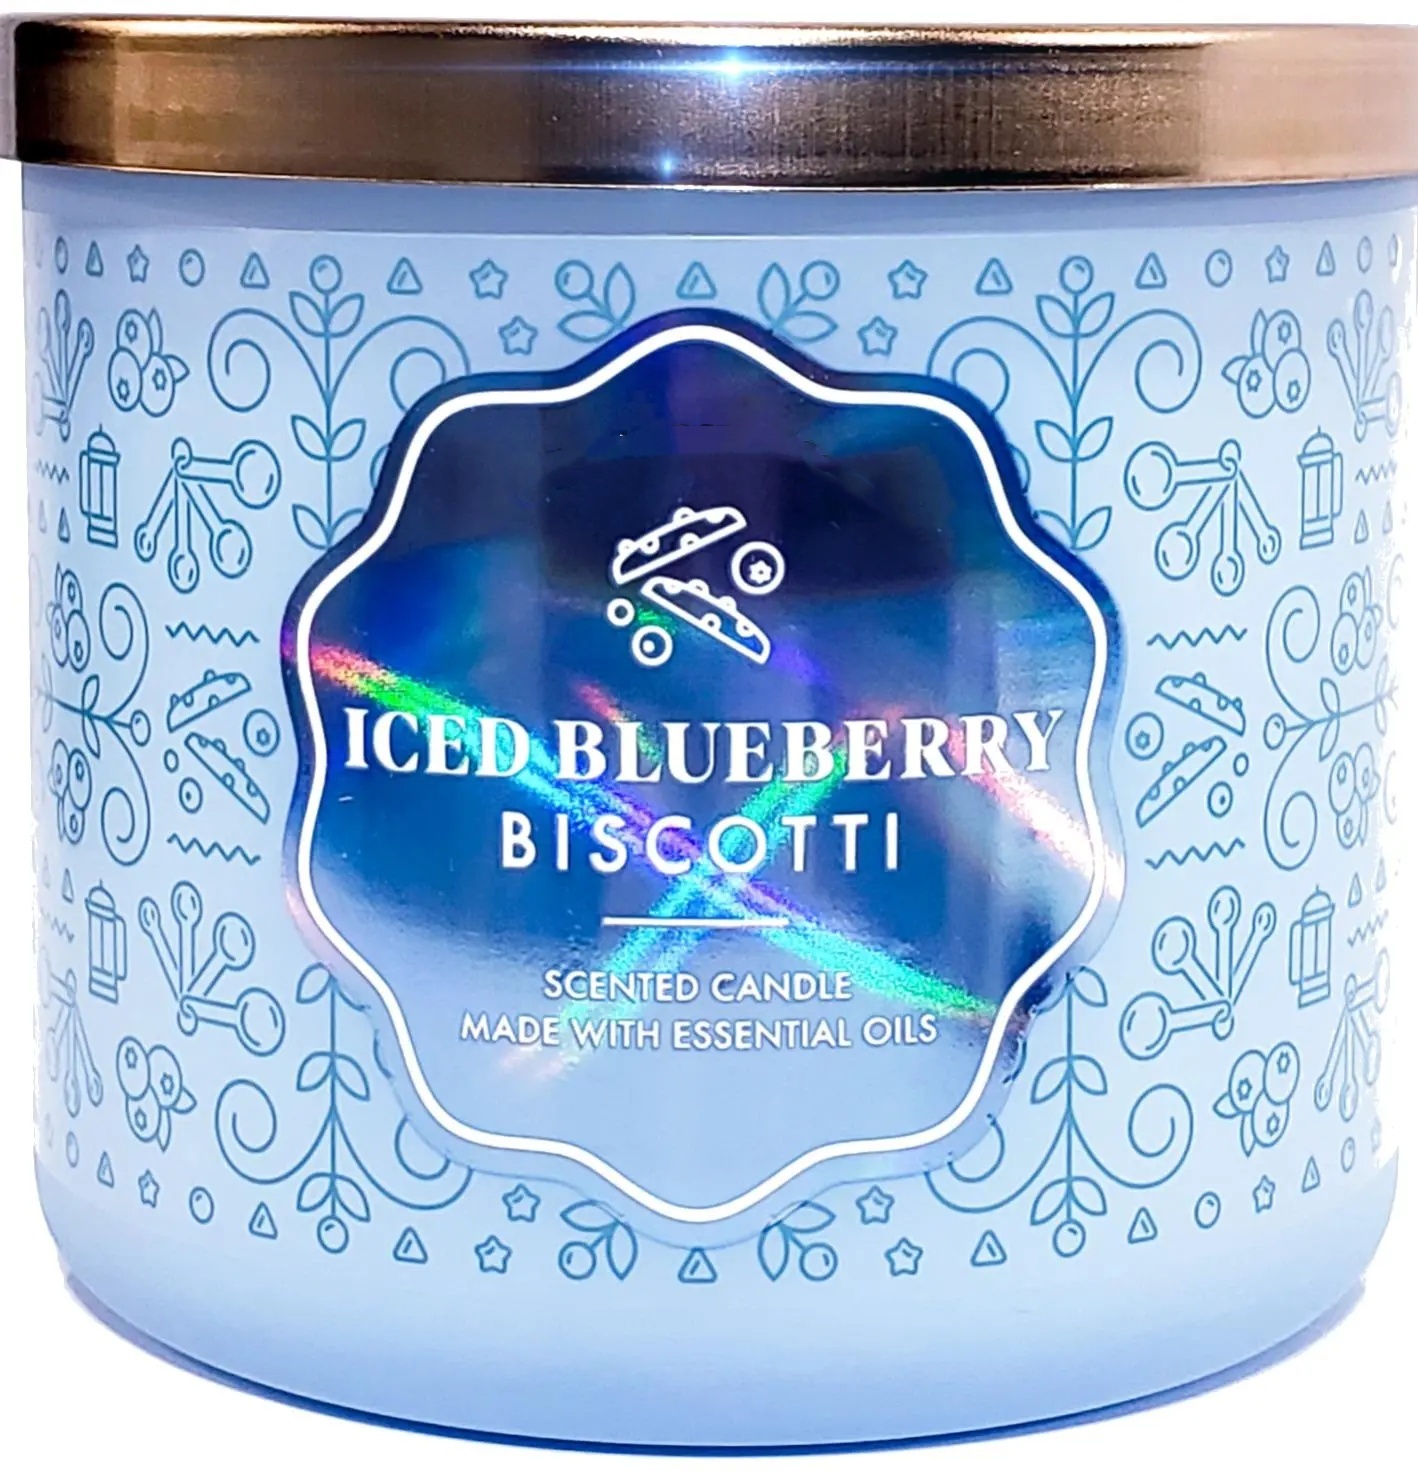 Blueberry Biscotti 3 Wick Candle Hologram Glass Style Jar